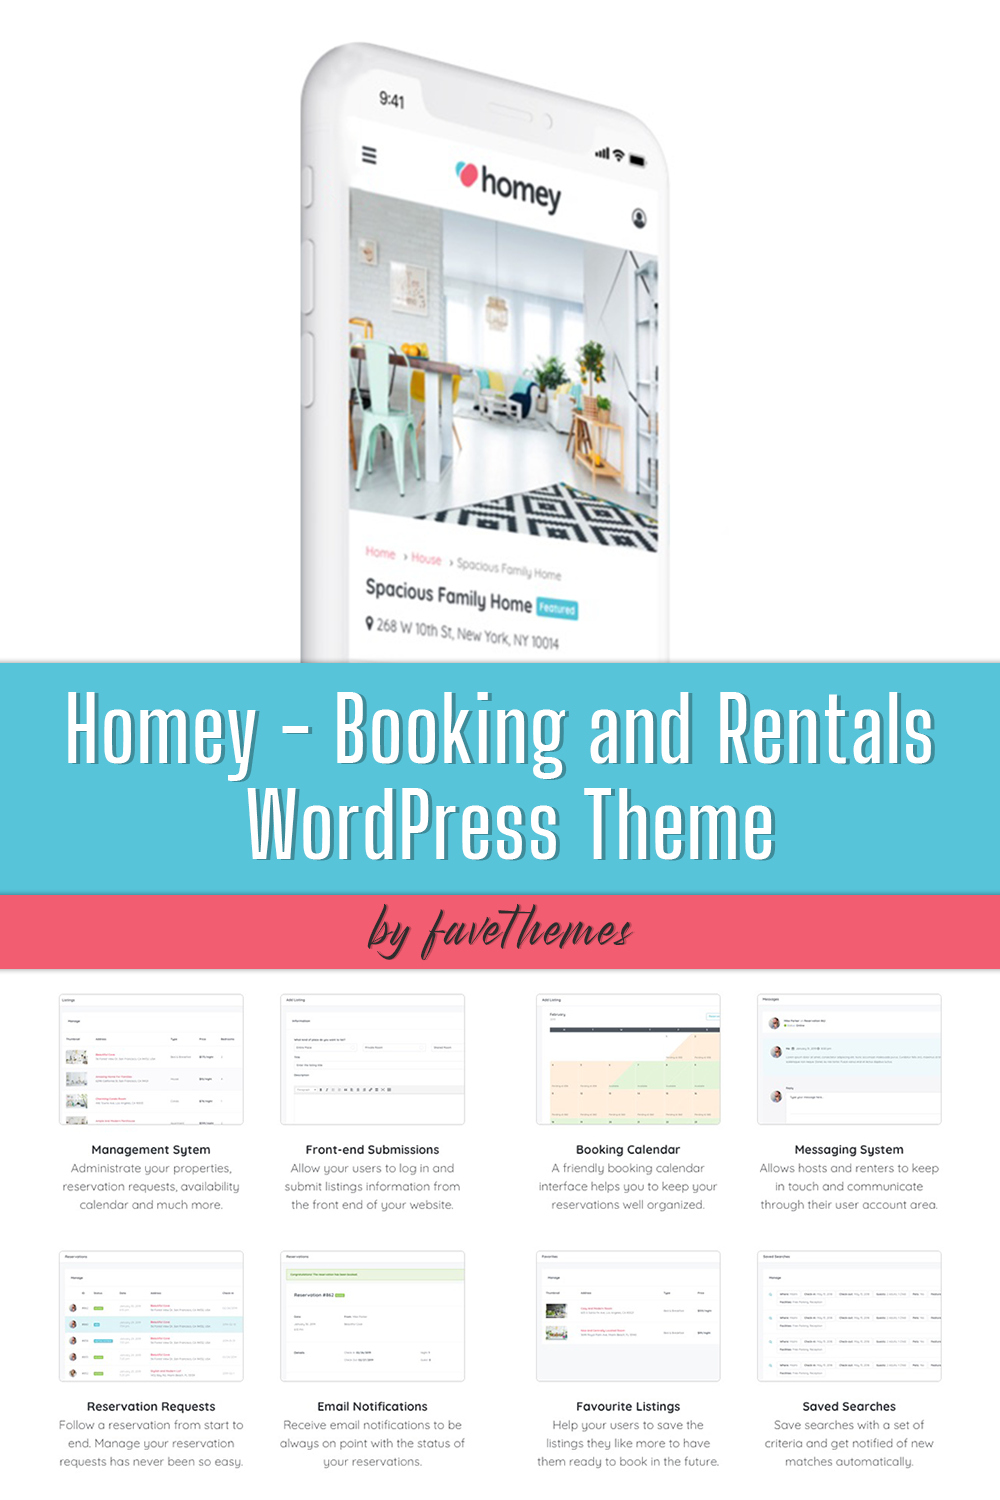 Illustrations homey booking and rentals wordpress theme of pinterest.